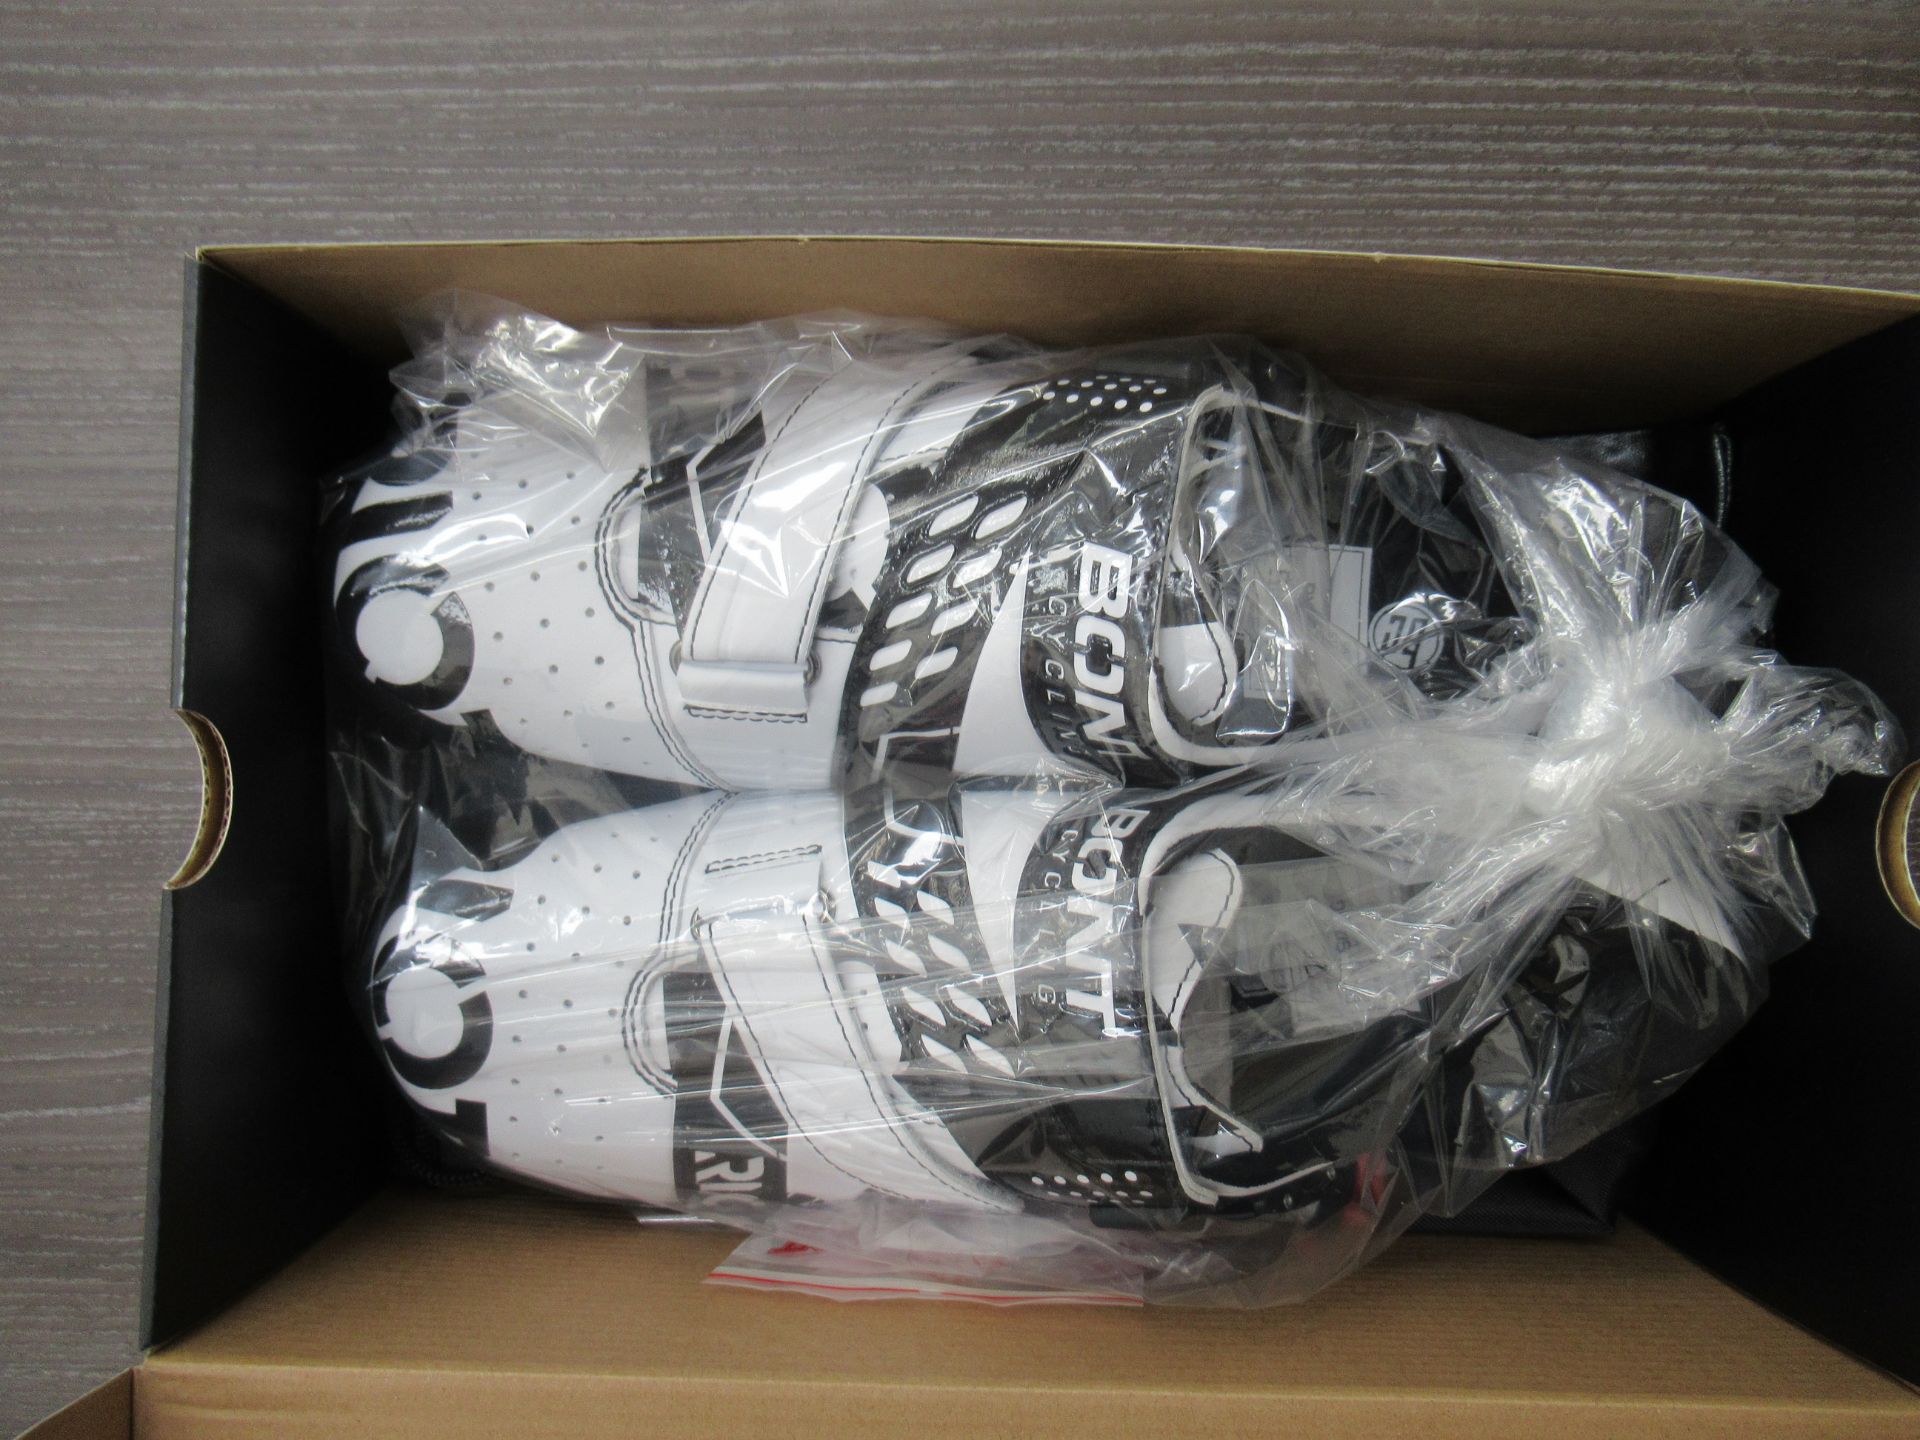 Pair of Bont Riot Buckle cycling shoes (white/black) - boxed EU size 45 (RRP£104.99) - Image 4 of 4